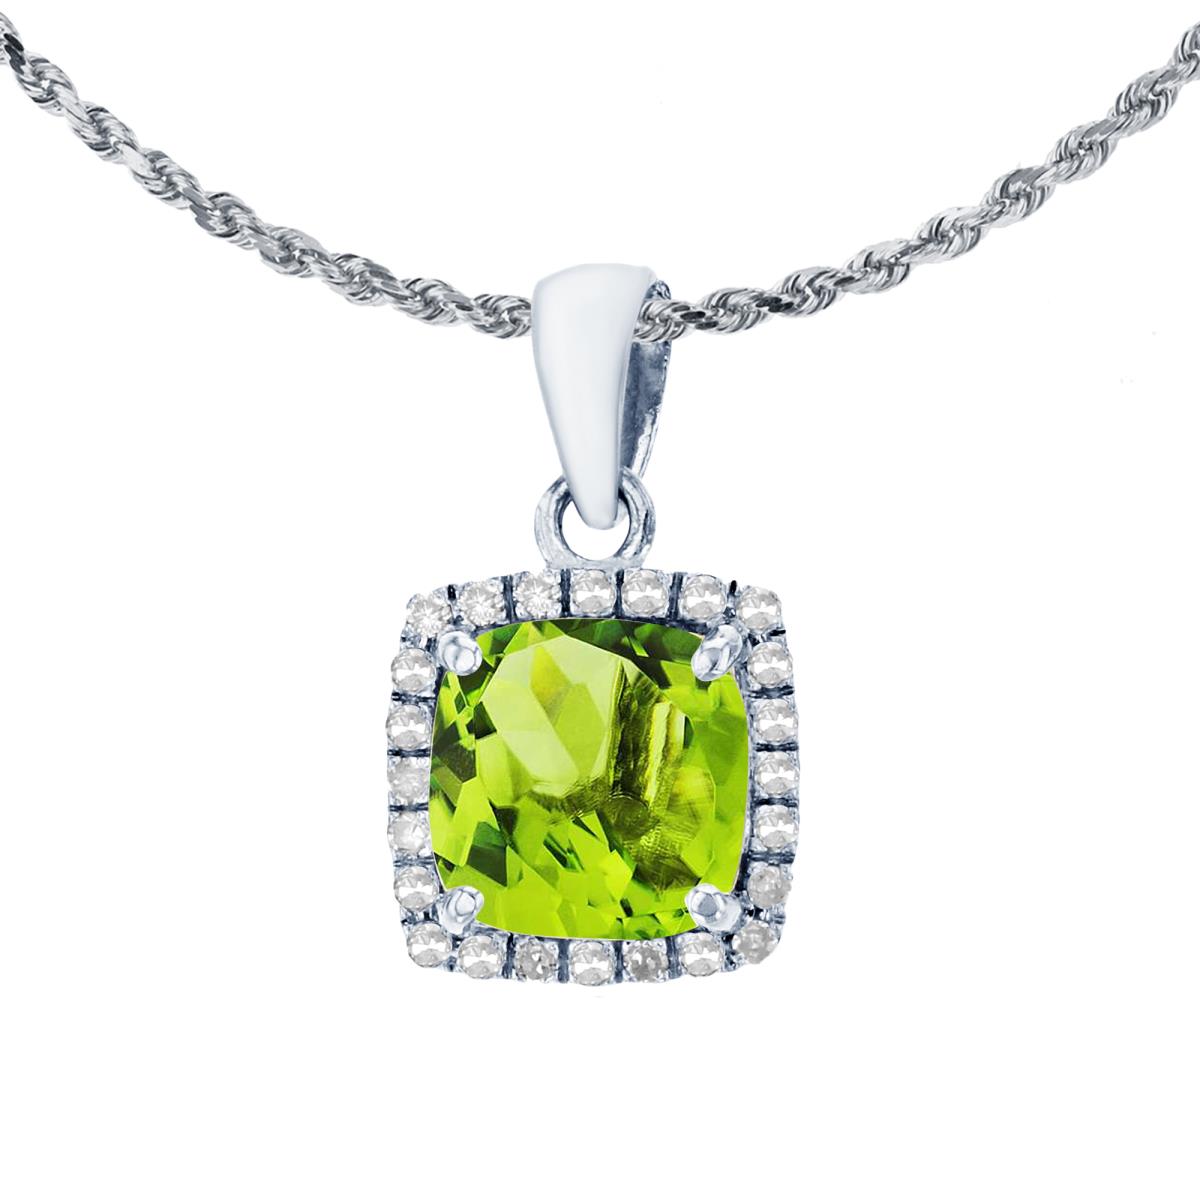 10K White Gold 7mm Cushion Peridot & 0.12 CTTW Diamond Halo 18" Rope Chain Necklace